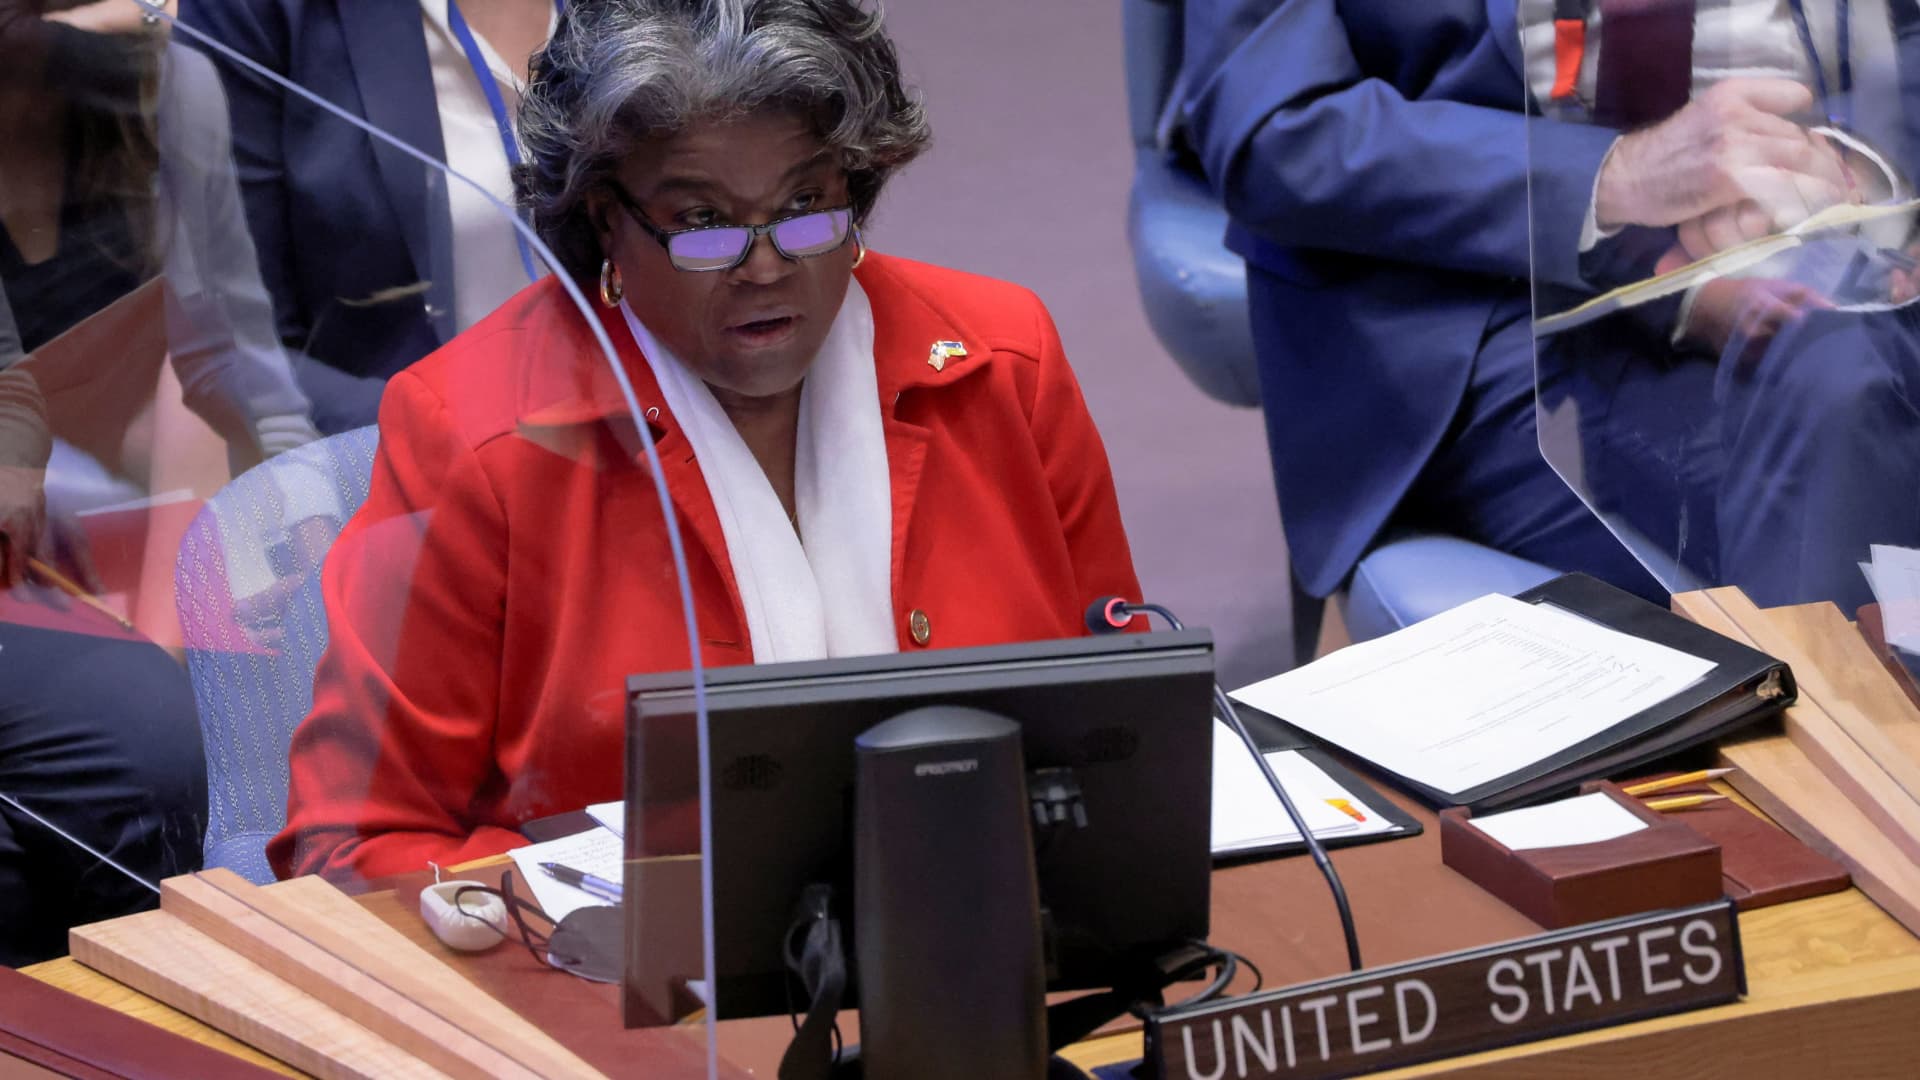 U.S. Ambassador to the United Nations Linda Thomas-Greenfield addresses the United Nations Security Council during a meeting, amid Russia's invasion of Ukraine, at the United Nations Headquarters in Manhattan, New York City, New York, April 5, 2022.